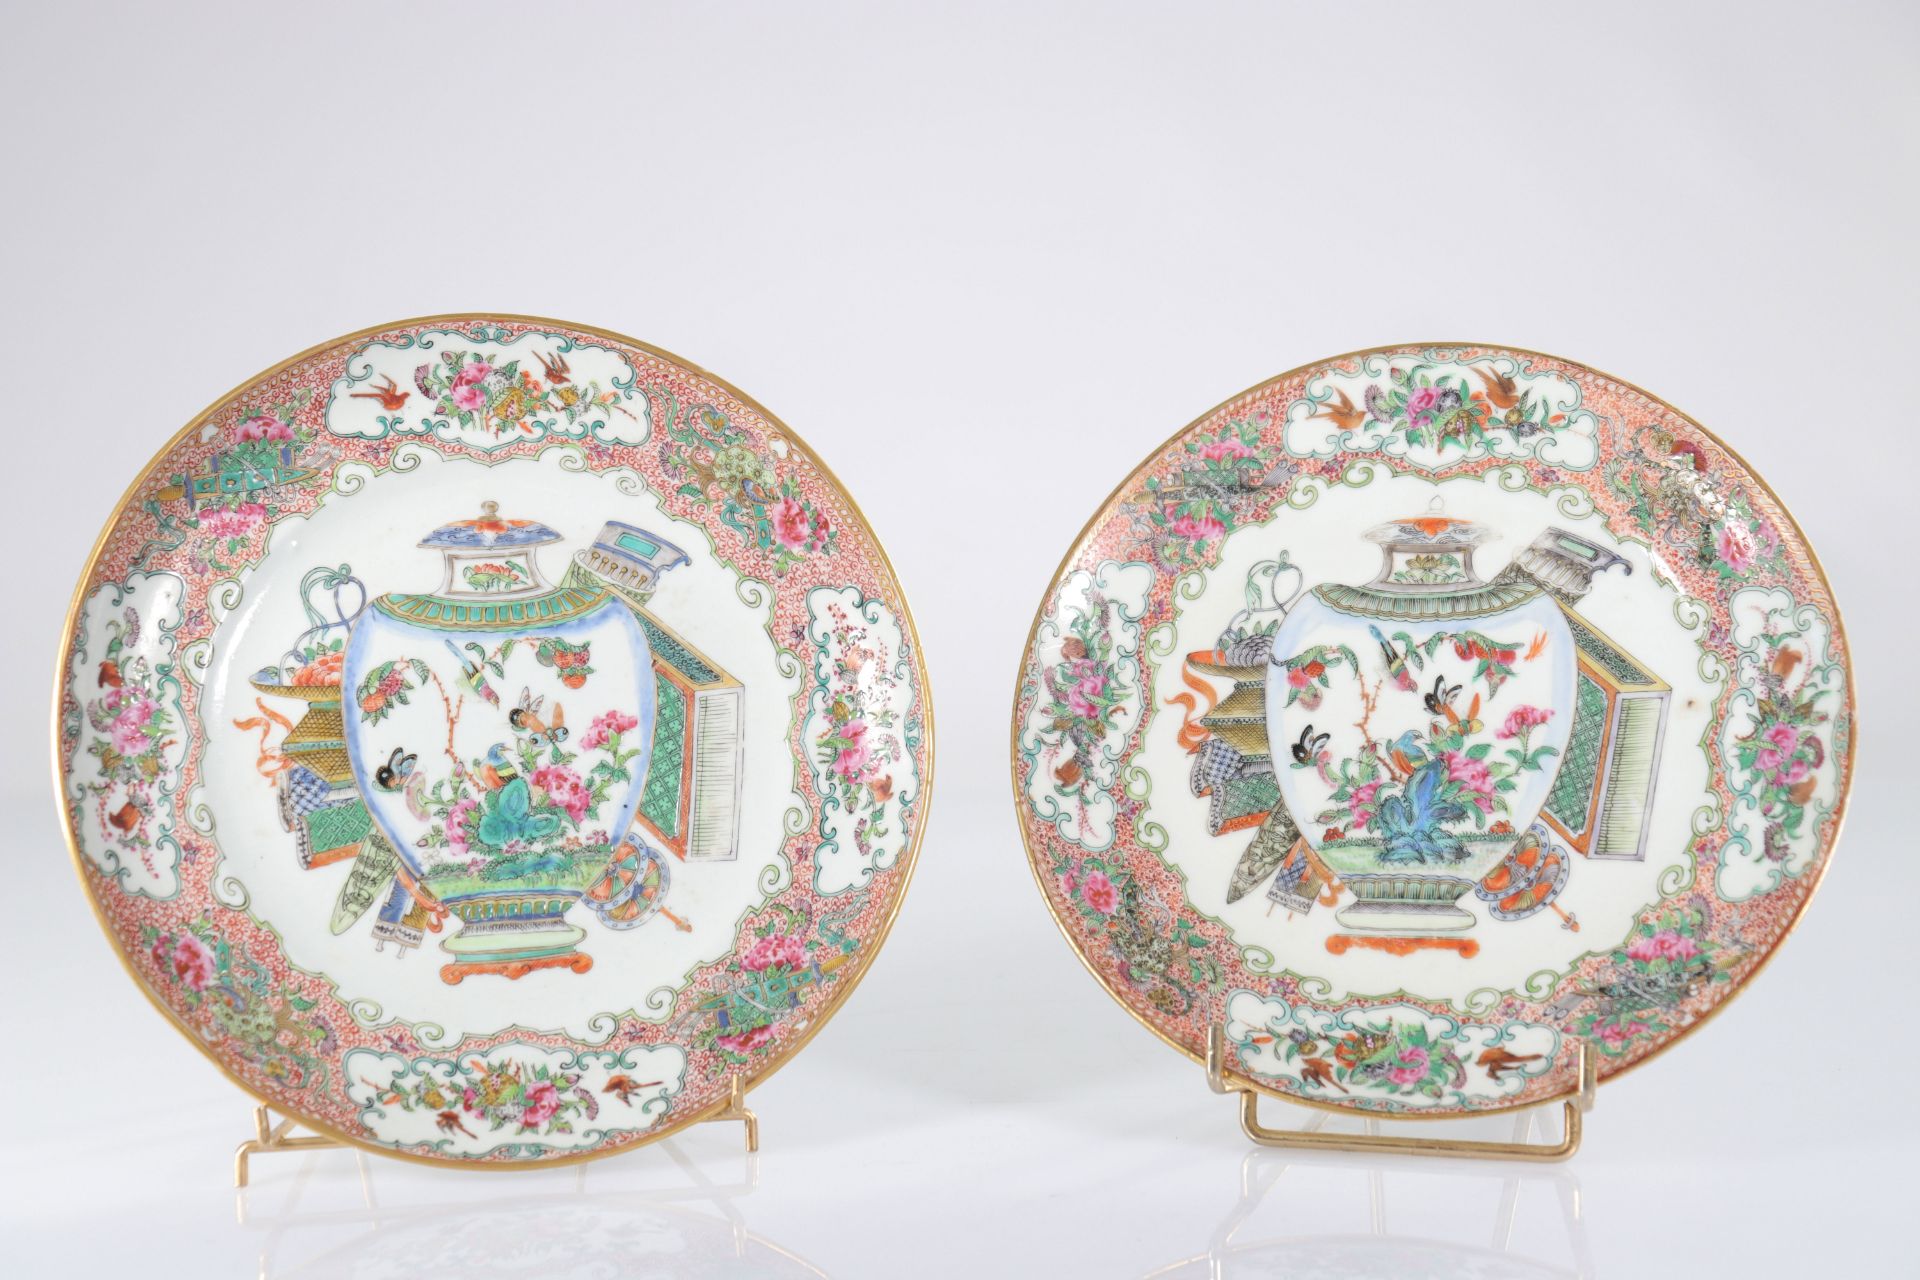 China - pair of canton plates - late 19th